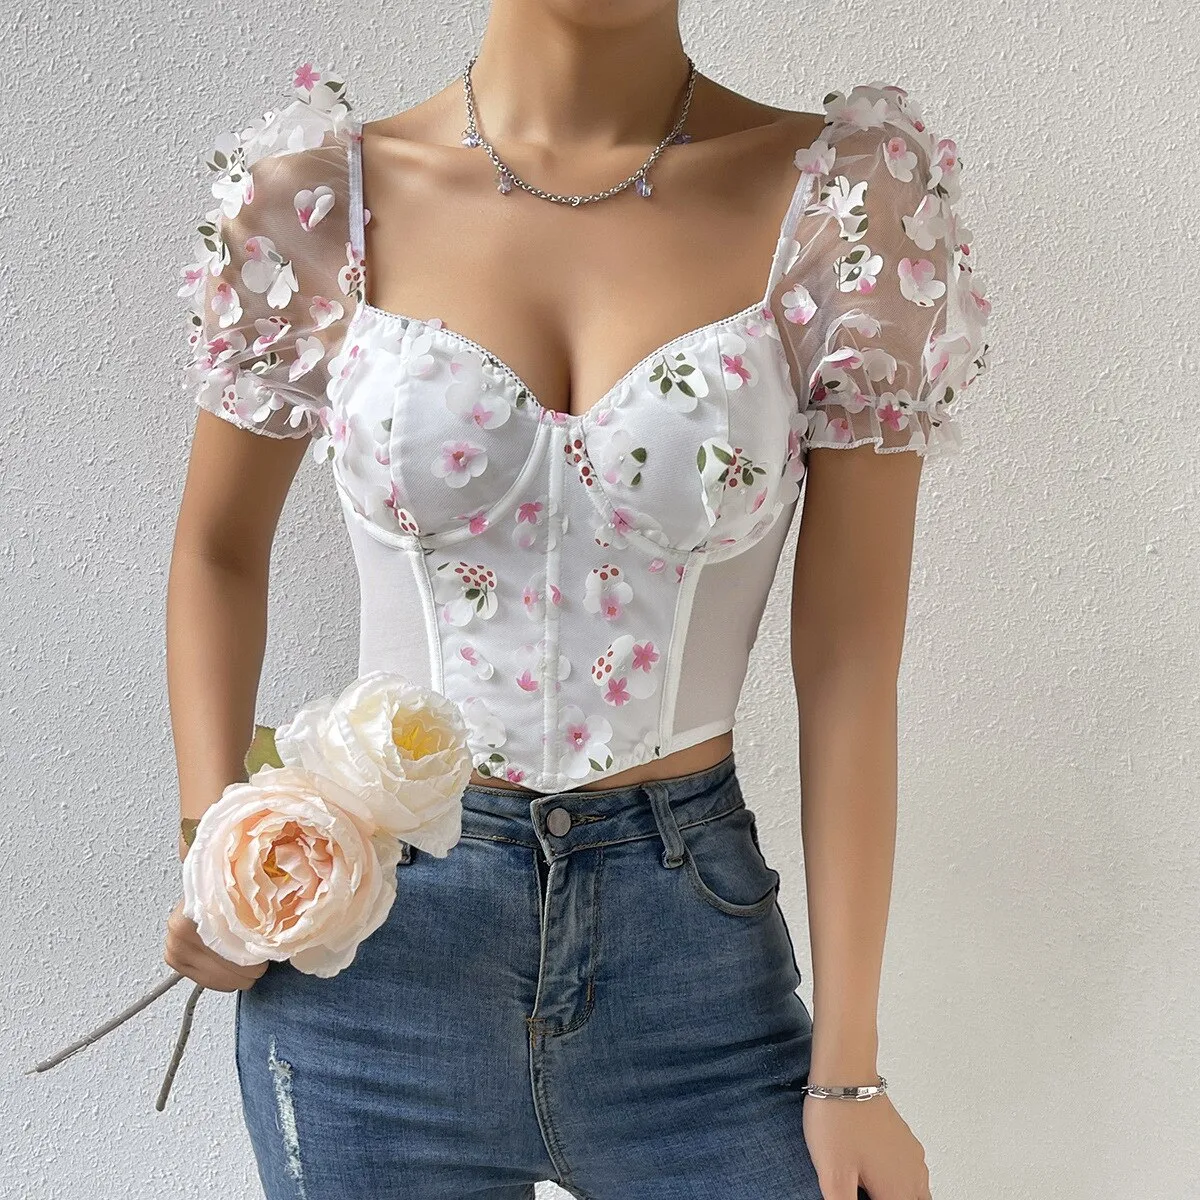 Min's Wardrobe】 Women Summer Corset Crop Tops for Women Flower Mesh Push-Up  Cropped Blouses Female Bustier Boned Puff Sleeve Tops Outfit Bustier Top |  Lazada PH